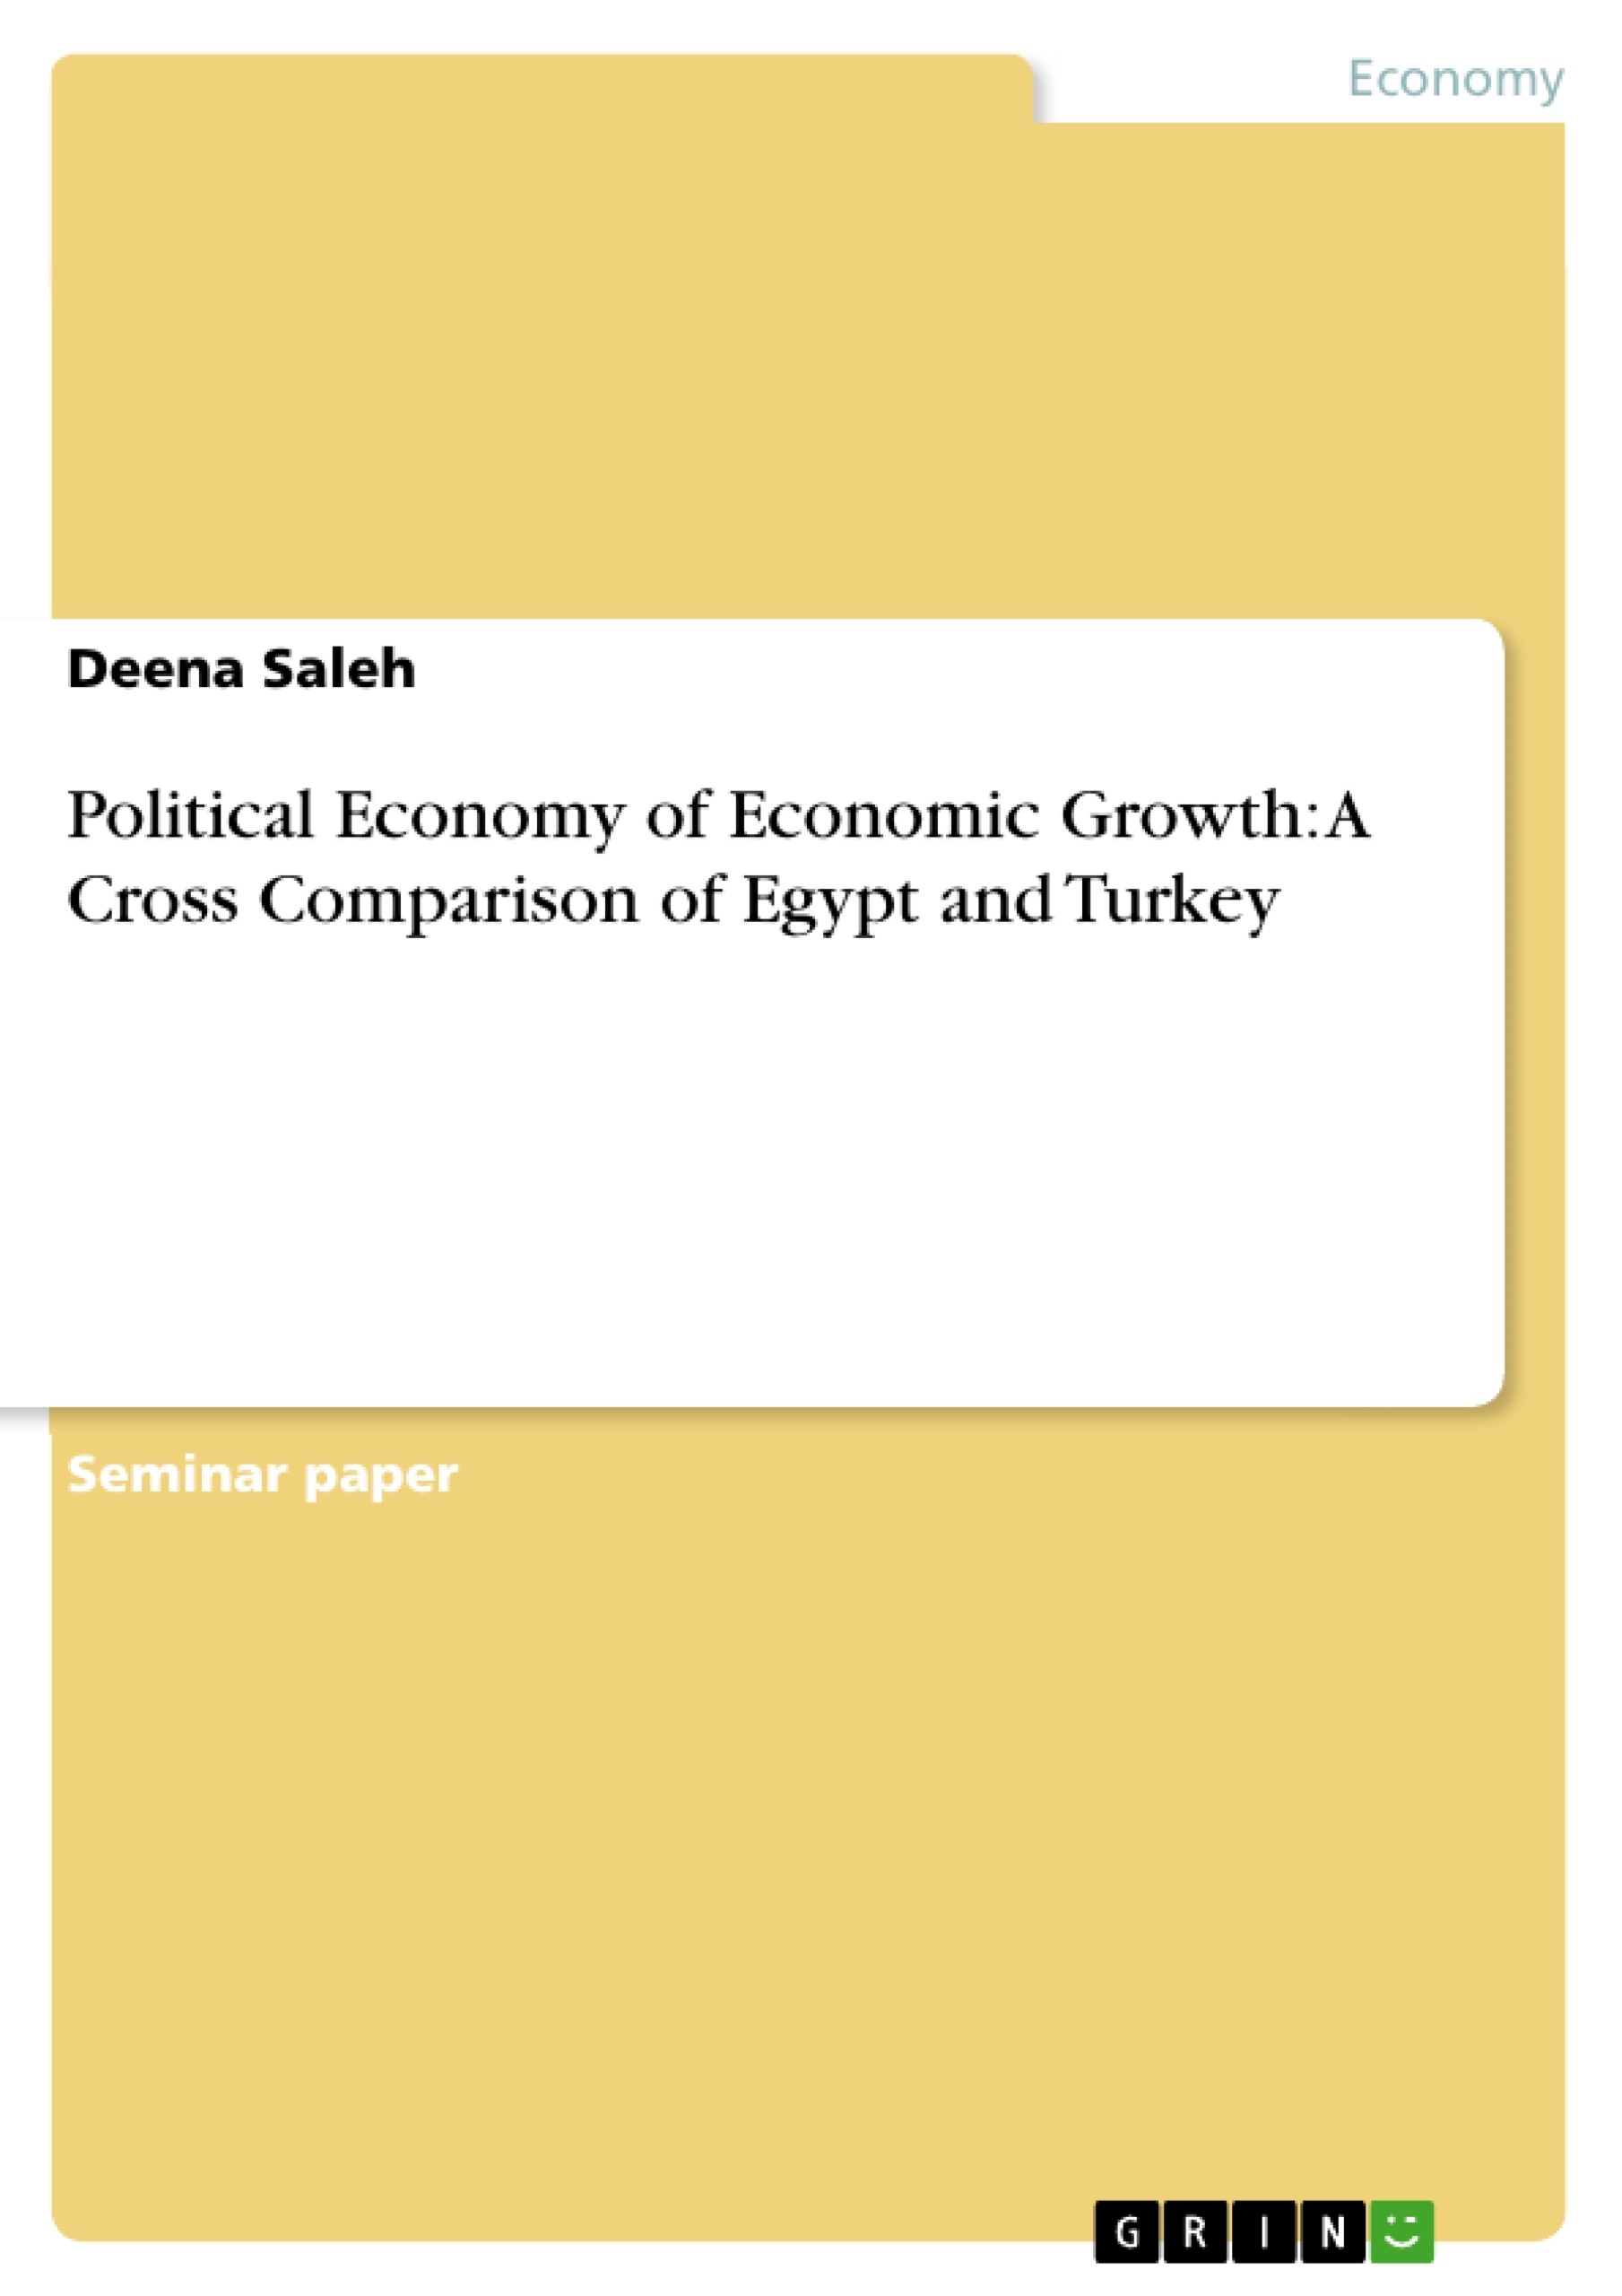 Title: Political Economy of Economic Growth: A Cross Comparison of Egypt and Turkey